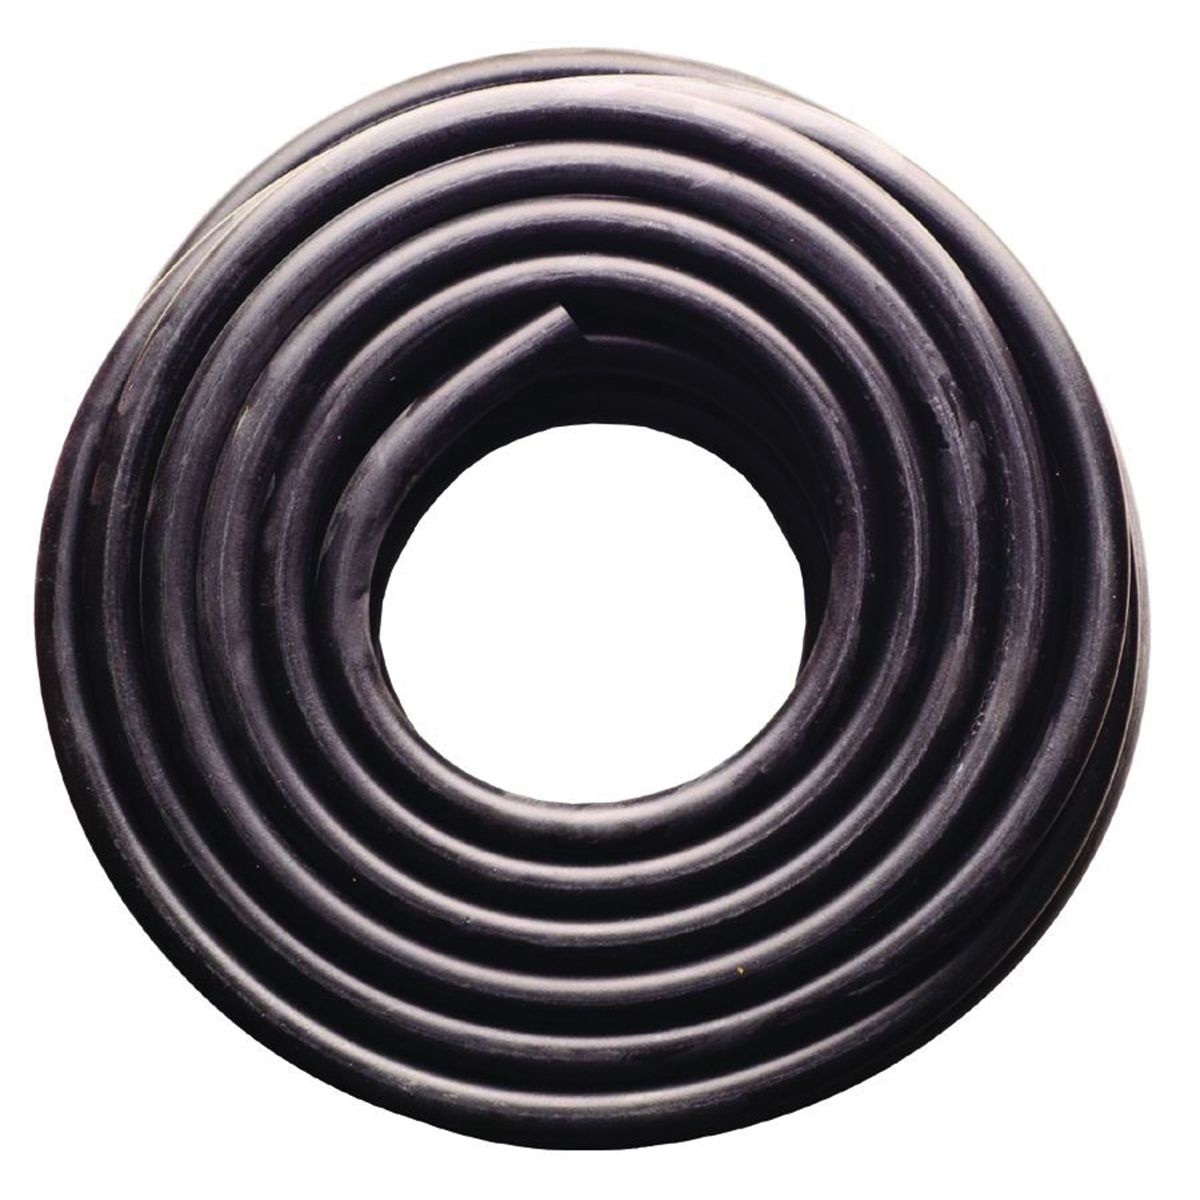 Deluxe Driveway Signal Hose - 3/8 In x 300 Ft L...